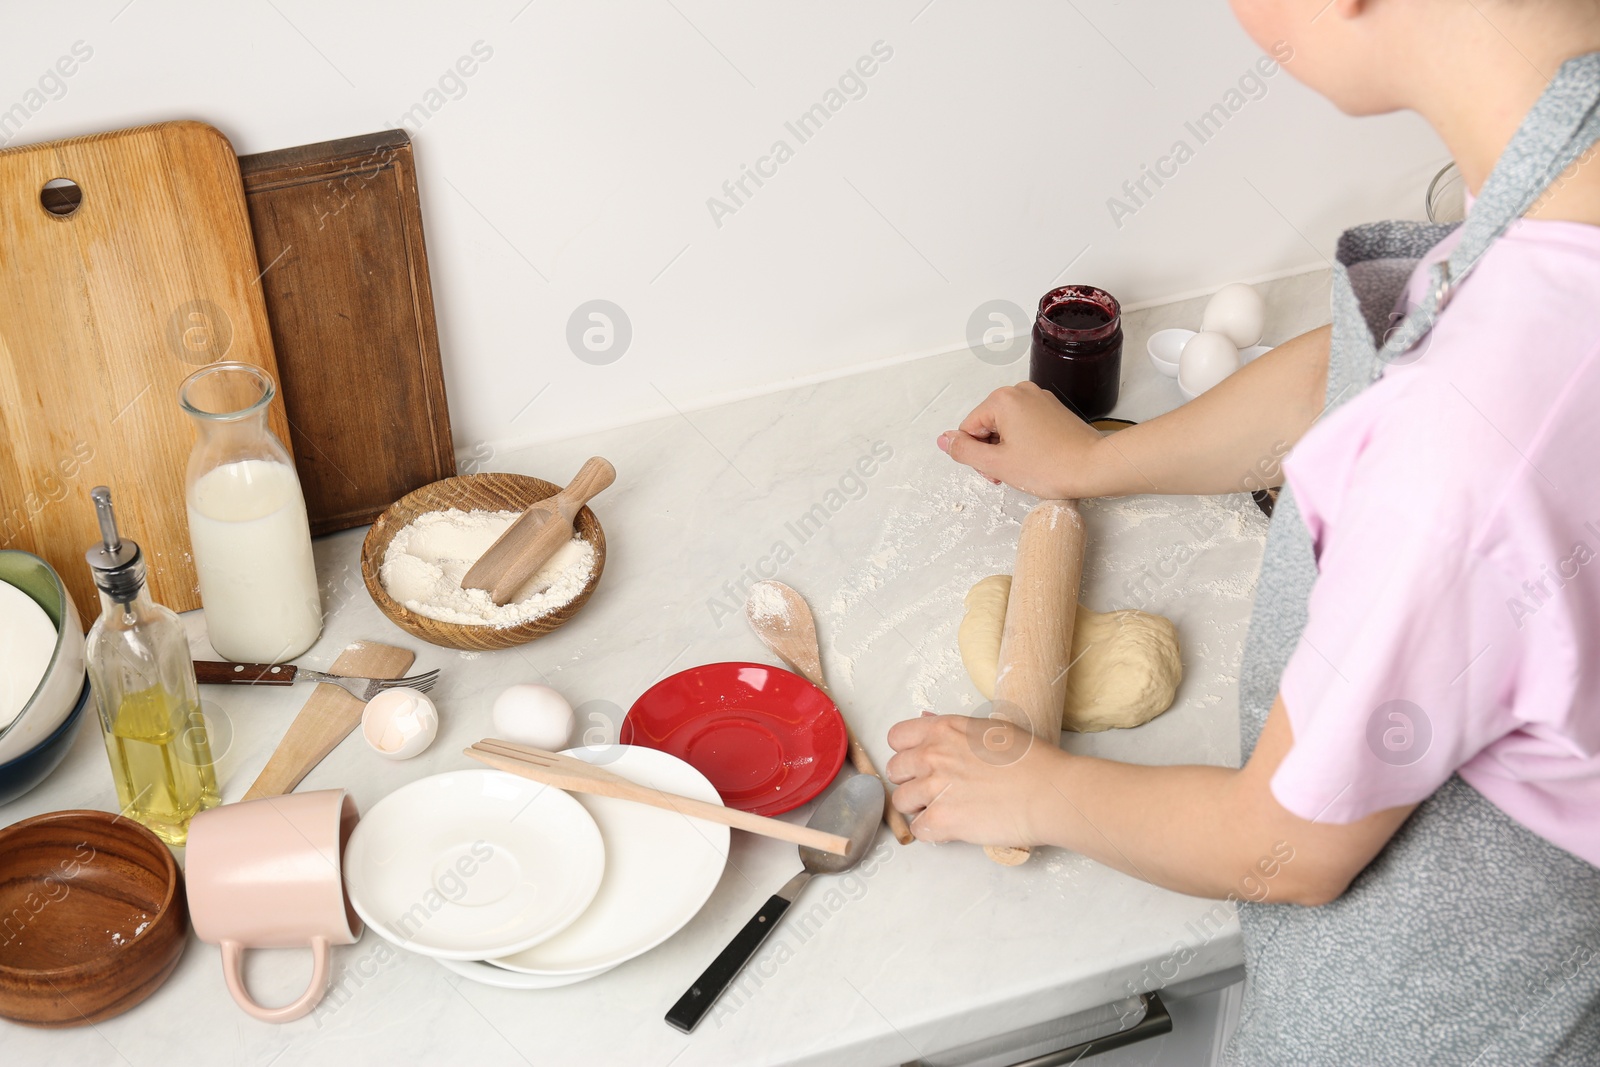 Photo of Woman cooking at messy countertop in kitchen, closeup. Many dishware, utensils and food leftovers on table